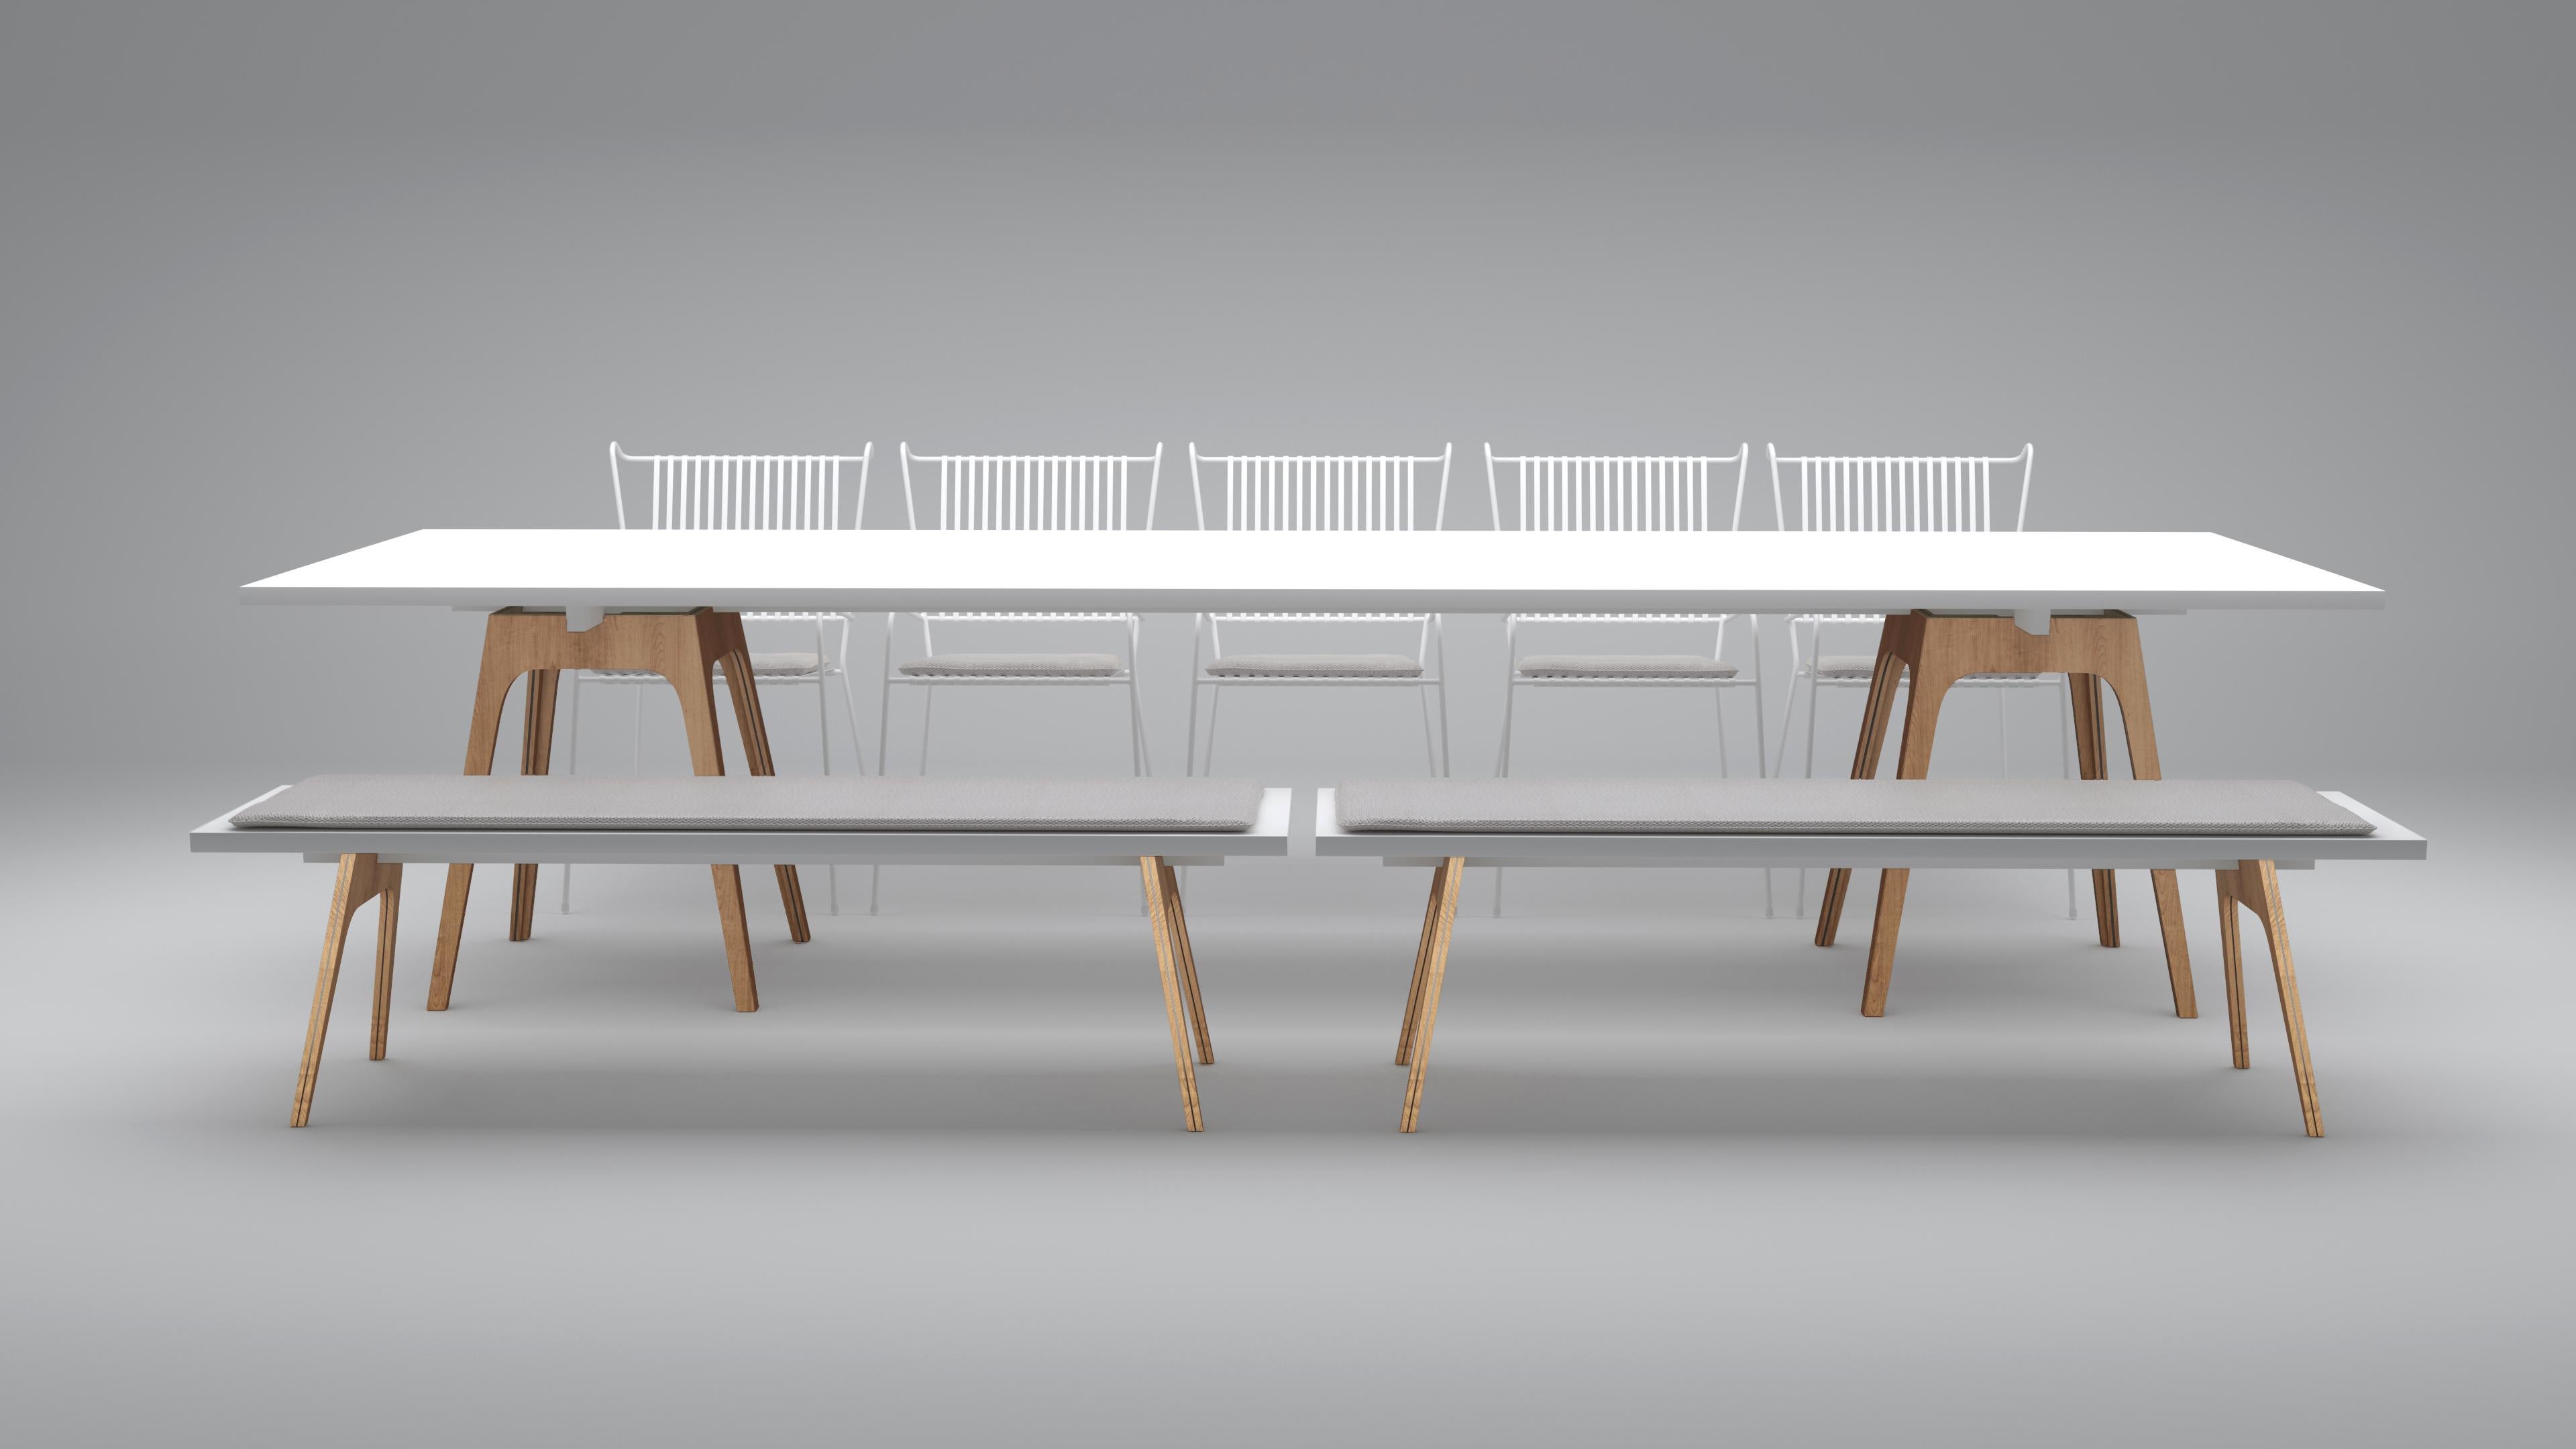 Set of 8 Marina White Dining Table, Benches and Capri Chairs by Cools Collection
Handmade.
Dimensions: 
Marina Dining Table: D 100 x W 340 x H 75 cm.
Marina Bench: D 35 x W 160 x H 45 cm.
Capri Chair with Seat Cushion: W 53 x D 60 x H 86